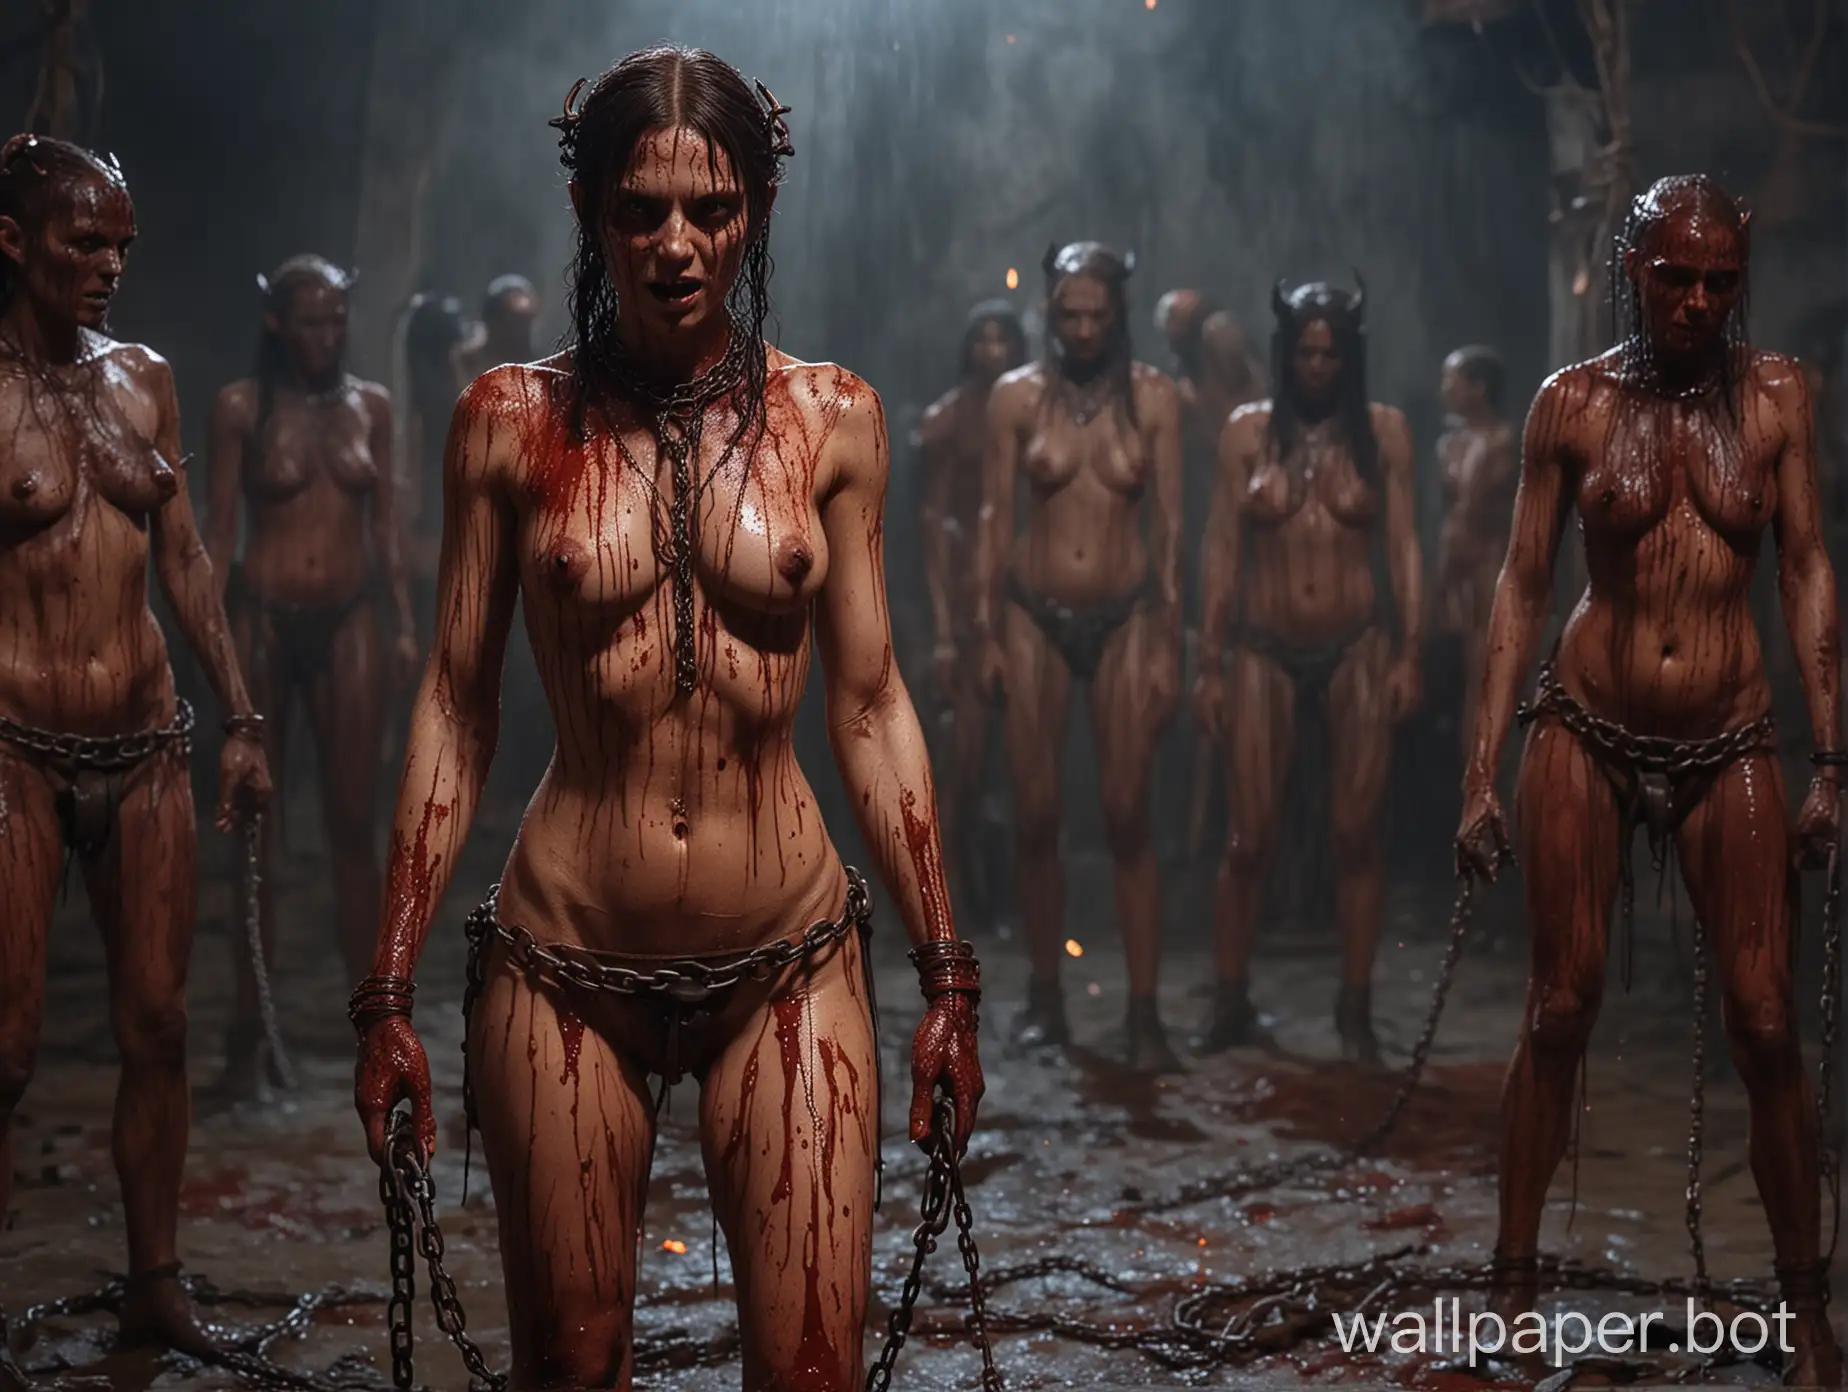 Dantes-Inferno-Surreal-Scene-with-Temptresses-Succubi-and-Chained-Captive-Slaves